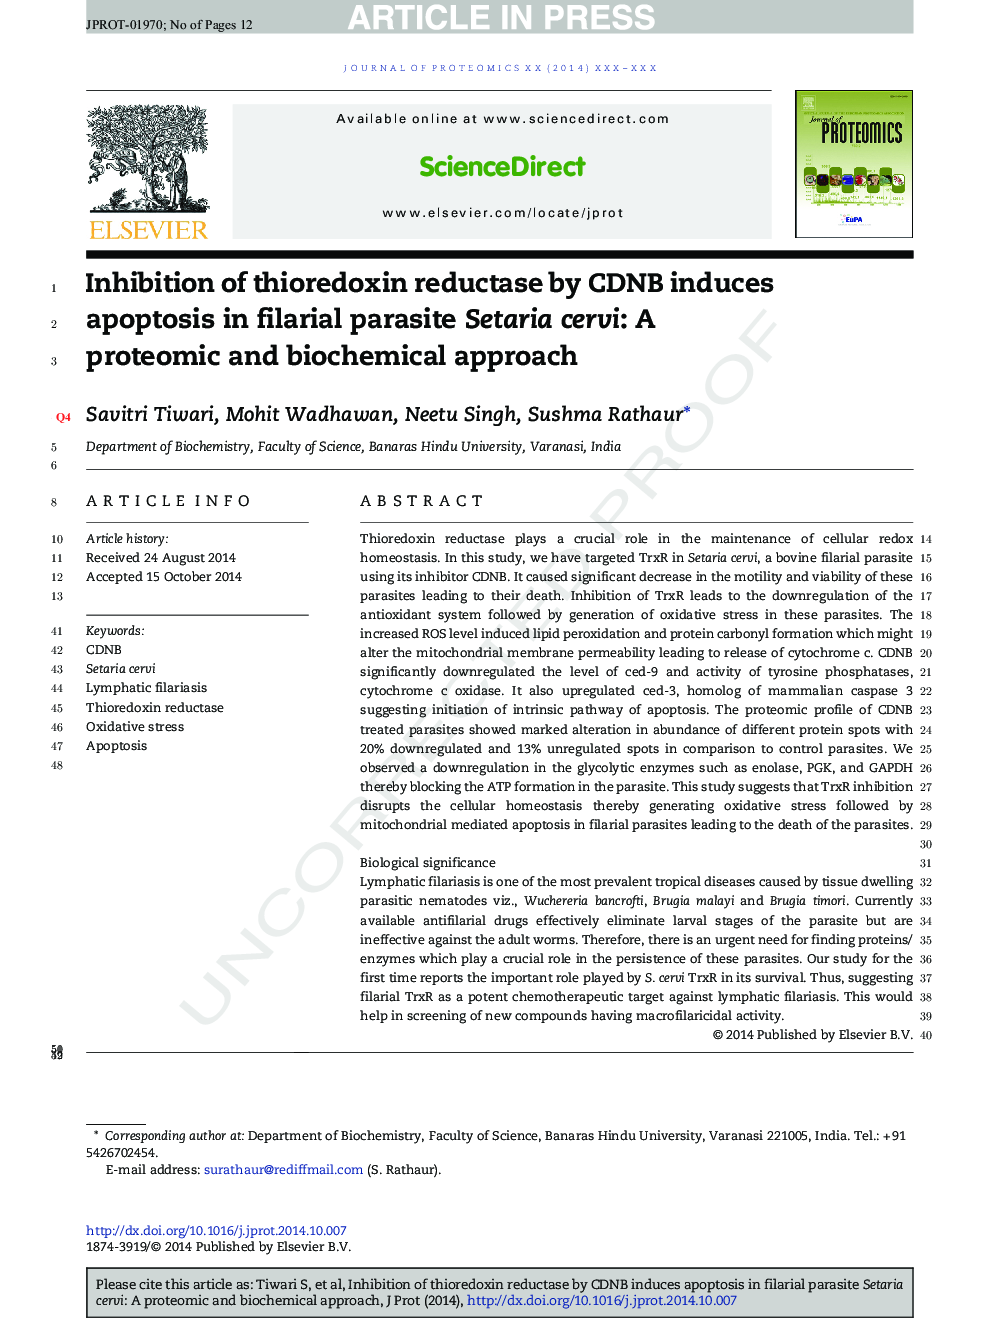 Effect of CDNB on filarial thioredoxin reductase : A proteomic and biochemical approach